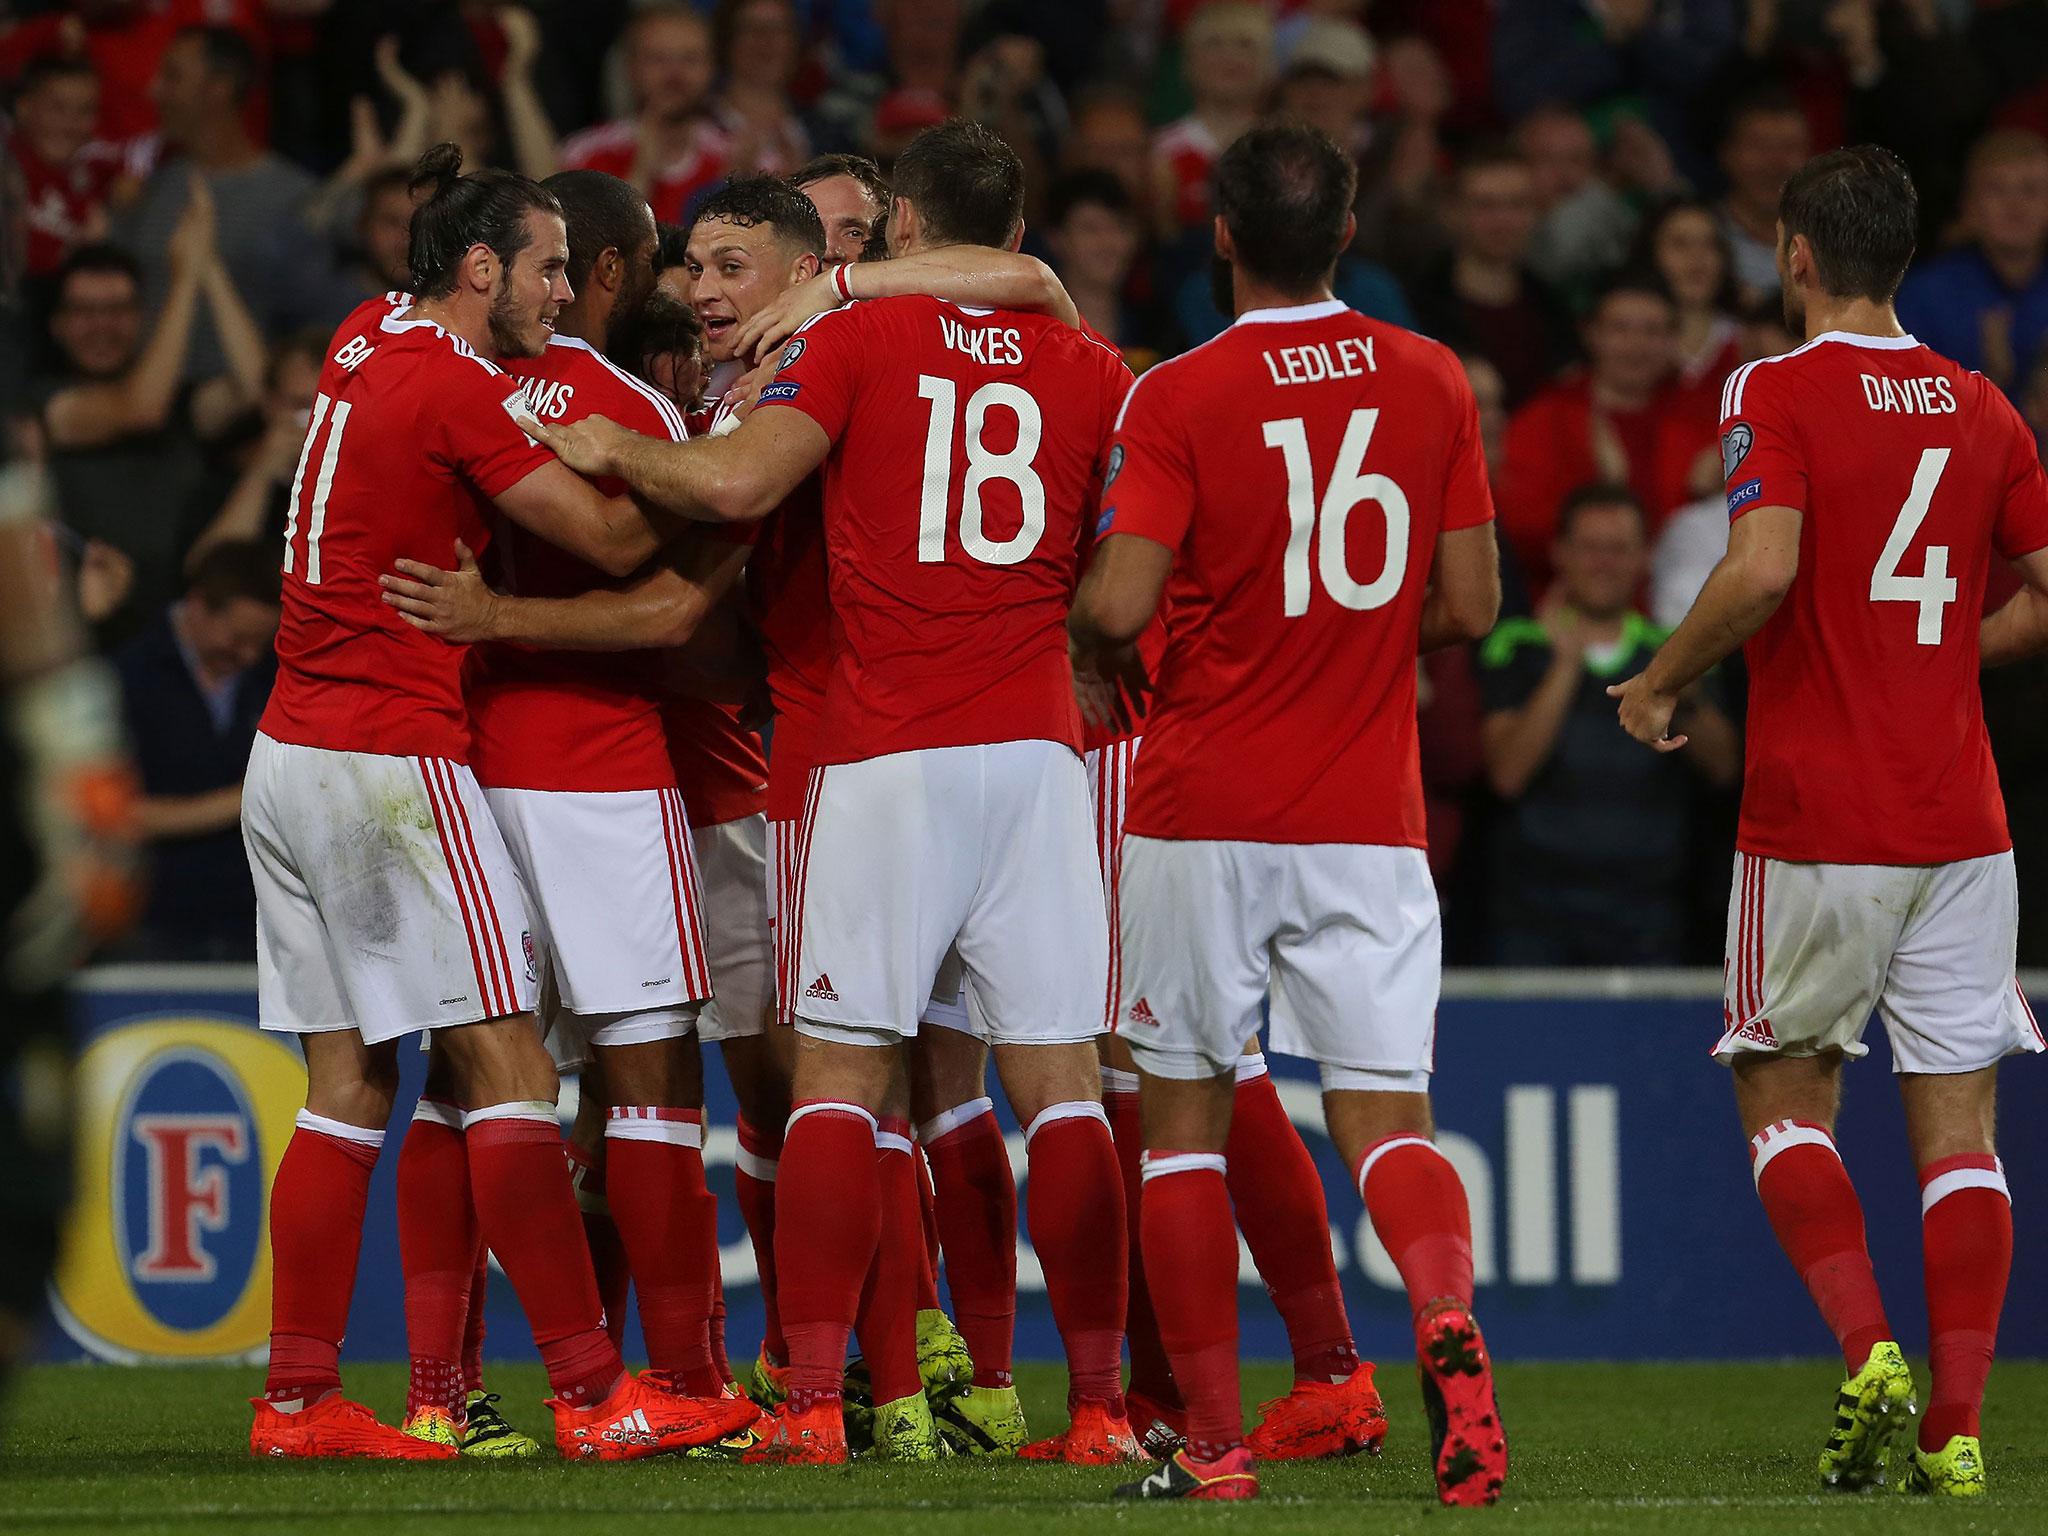 Wales currently sit third in Group D behind Serbia and the Republic of Ireland